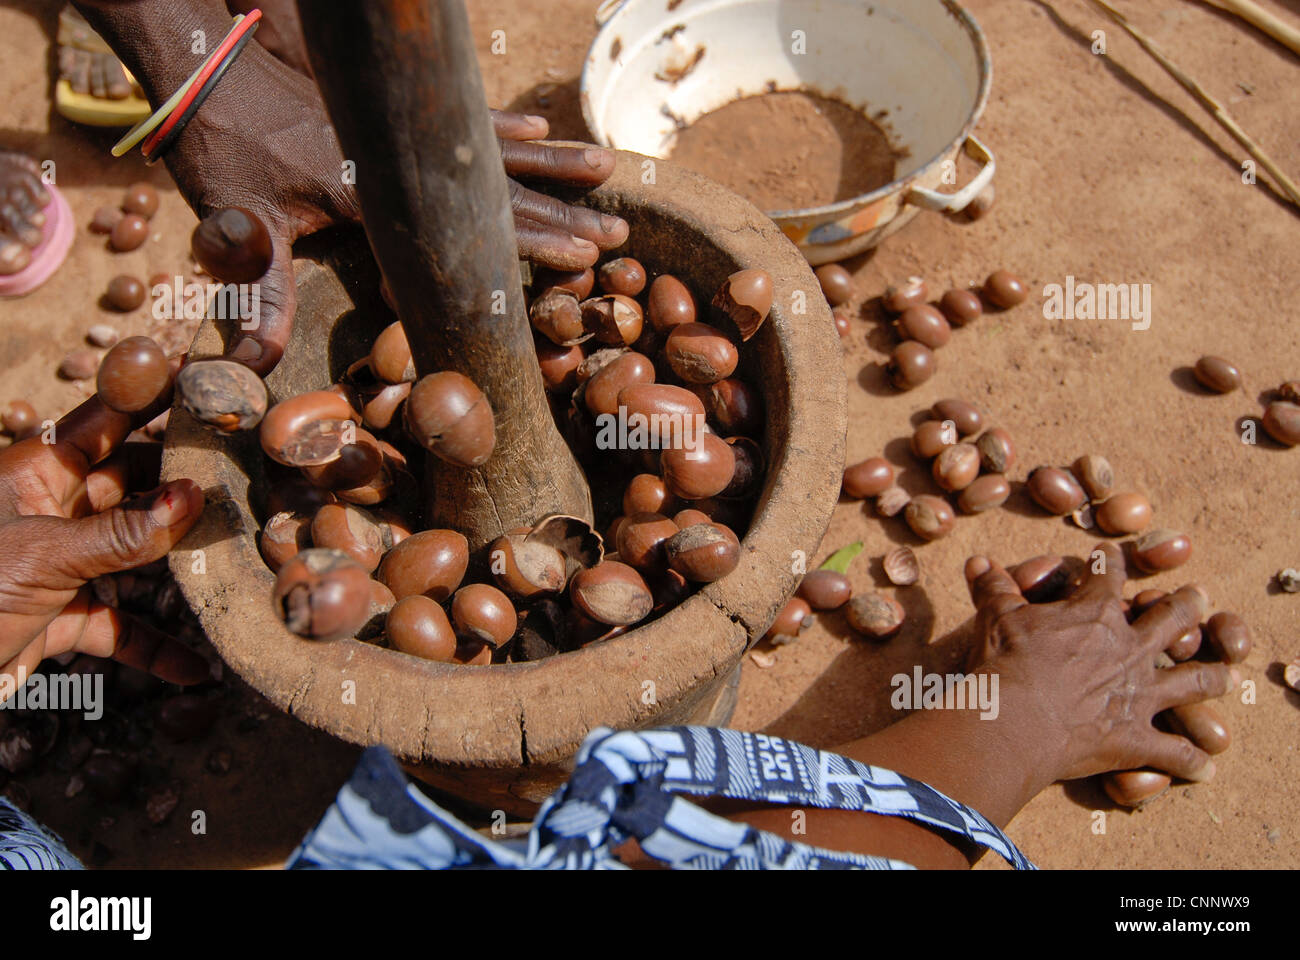 Burkina Faso , women produce fair trade shea butter from Shea nuts , shea butter is used as cooking oil or for cosmetics Stock Photo